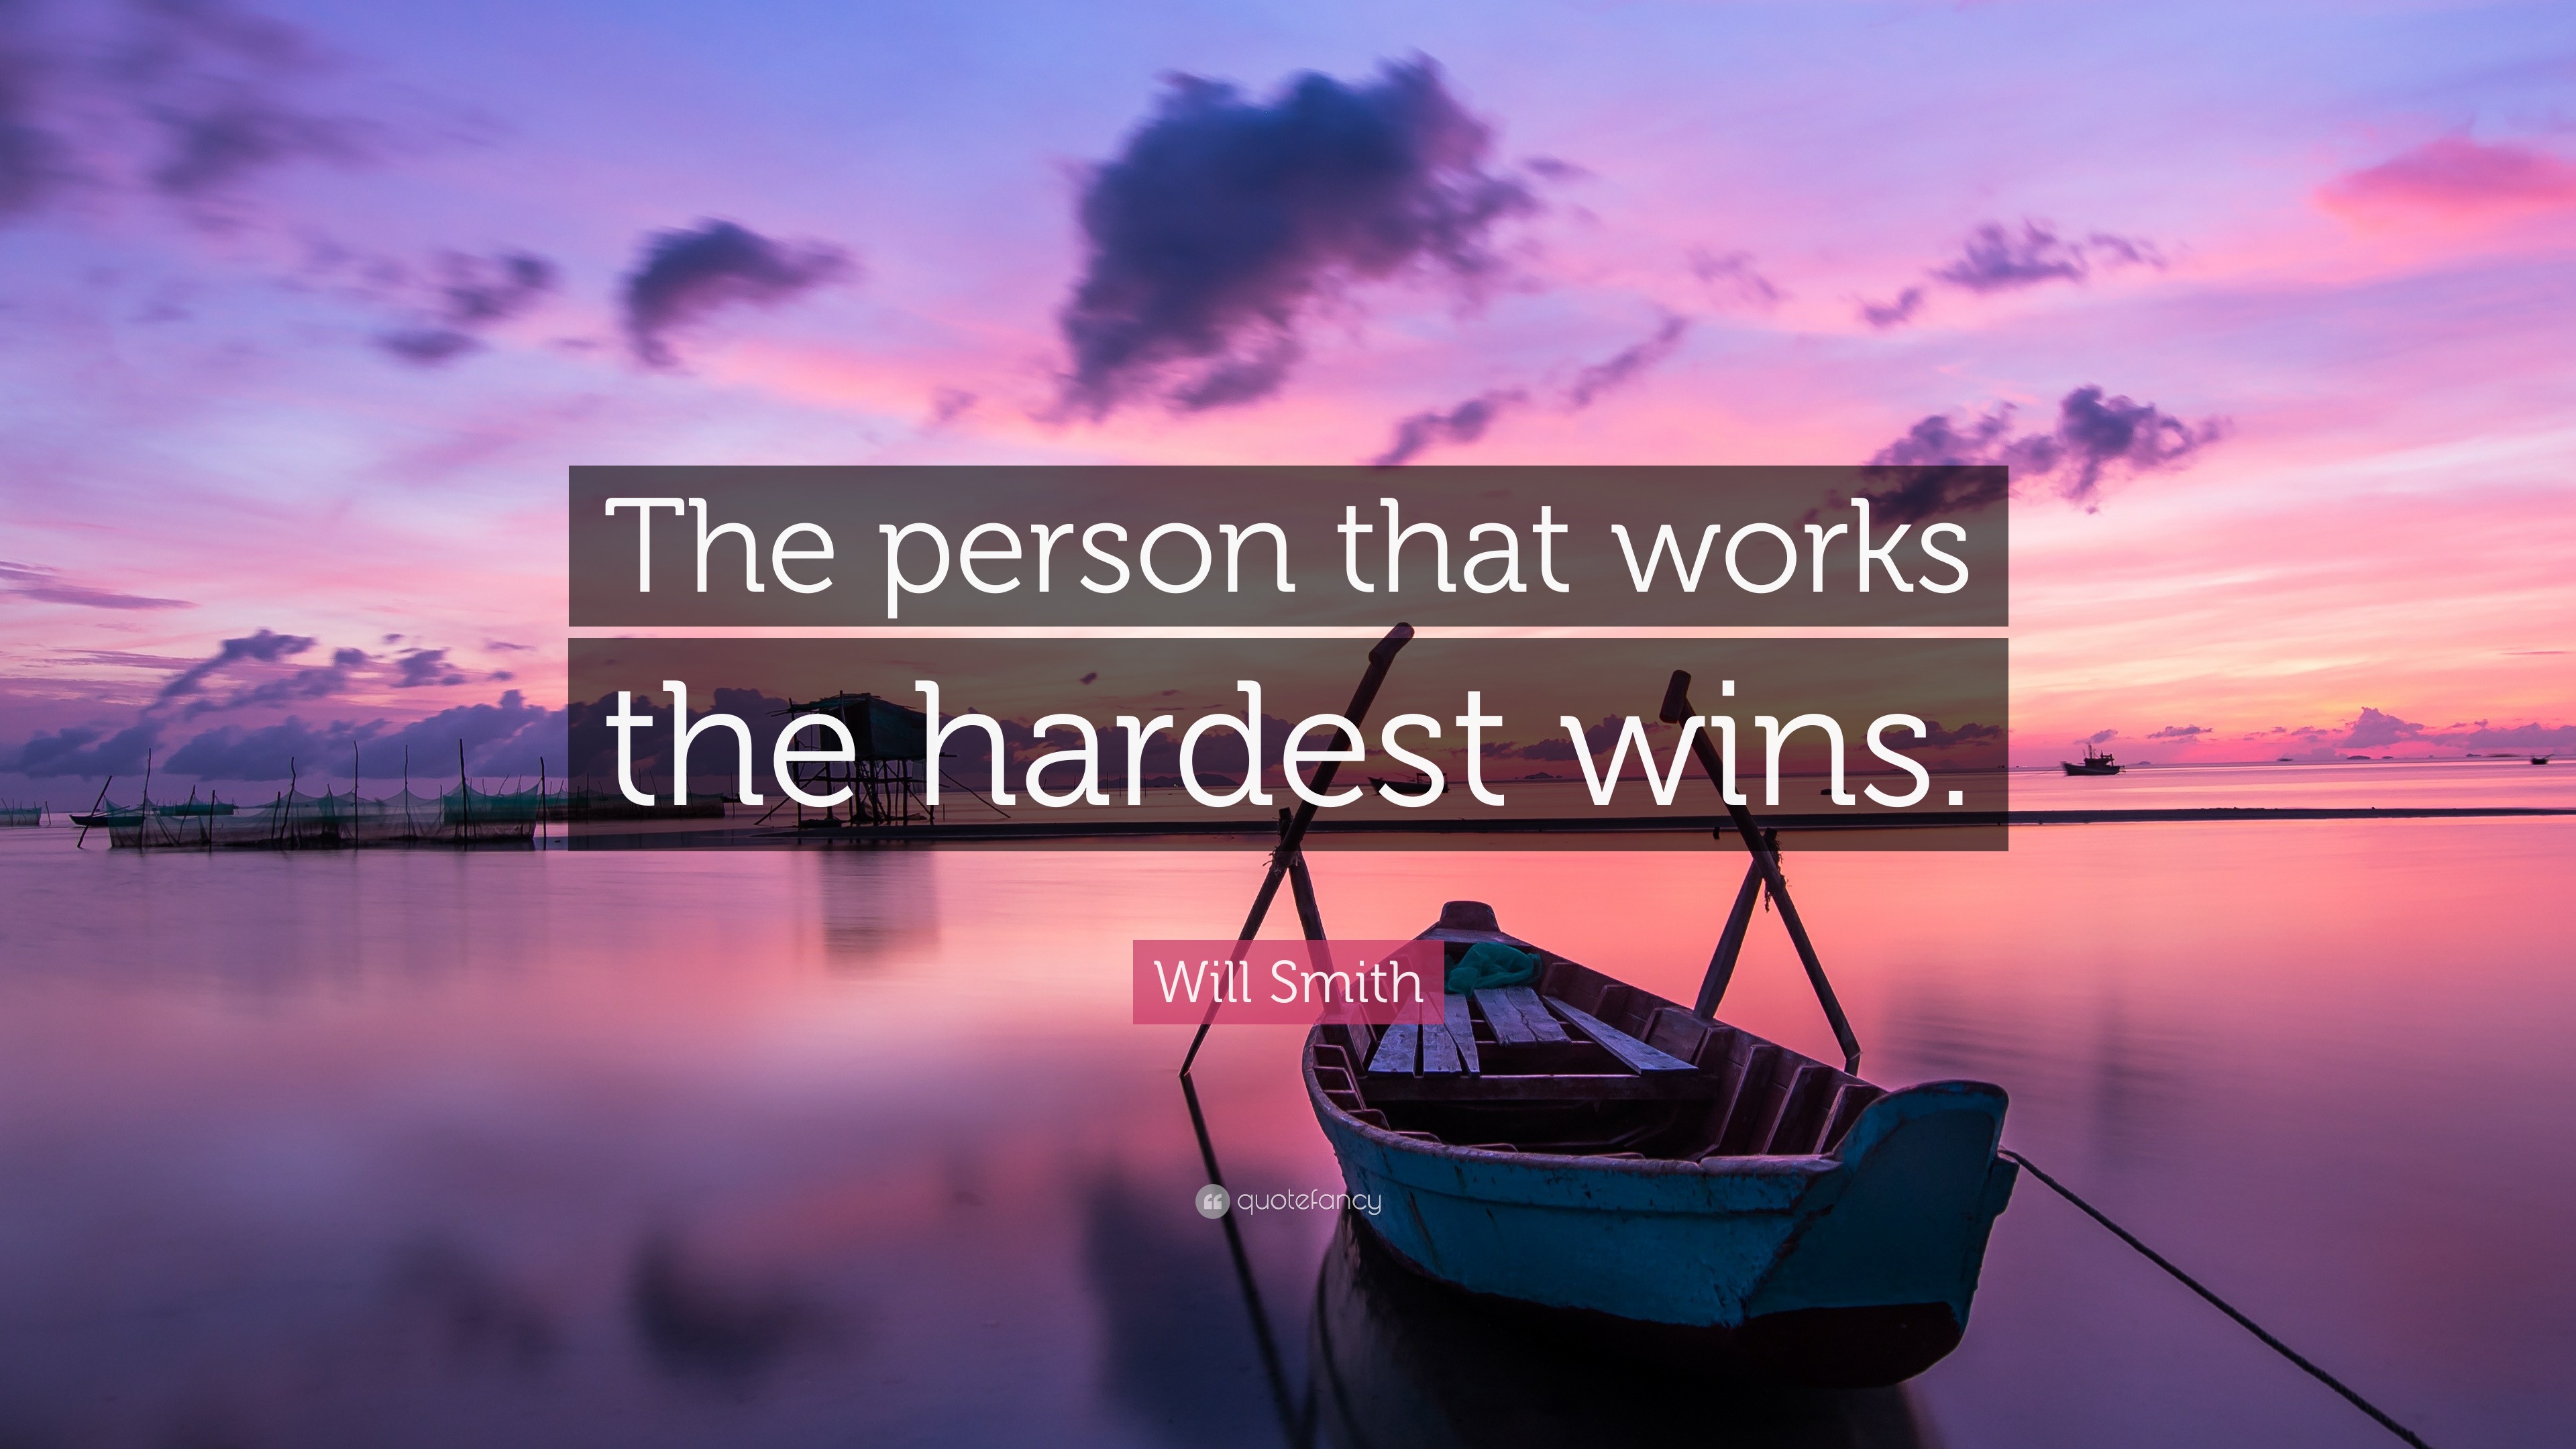 Will Smith Quote: “The person that works the hardest wins.”